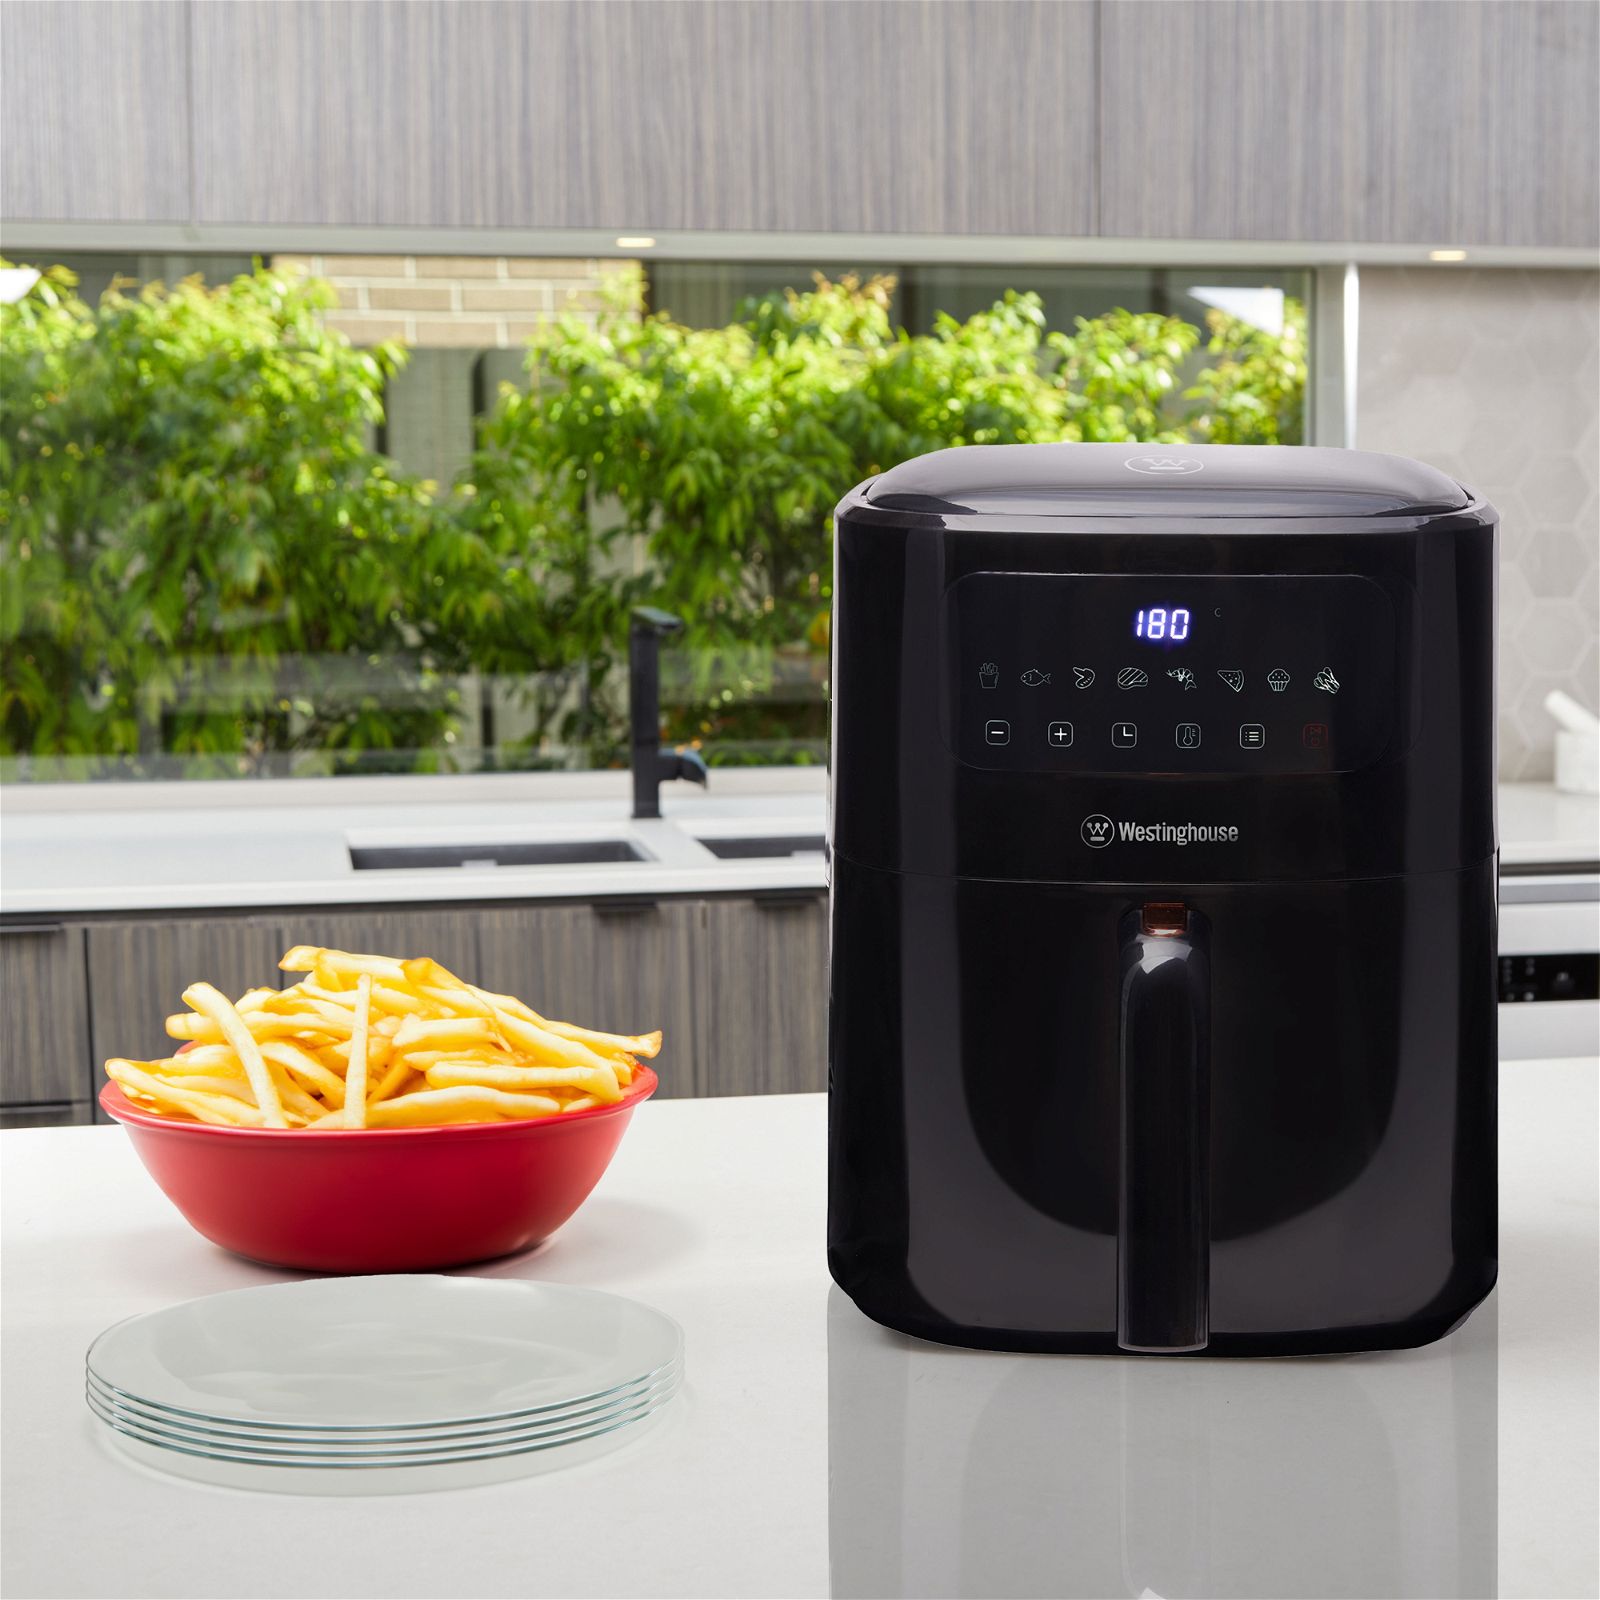 Westinghouse Air Fryer 1700W 6L-#product_category#- Distributed by: RVM under license